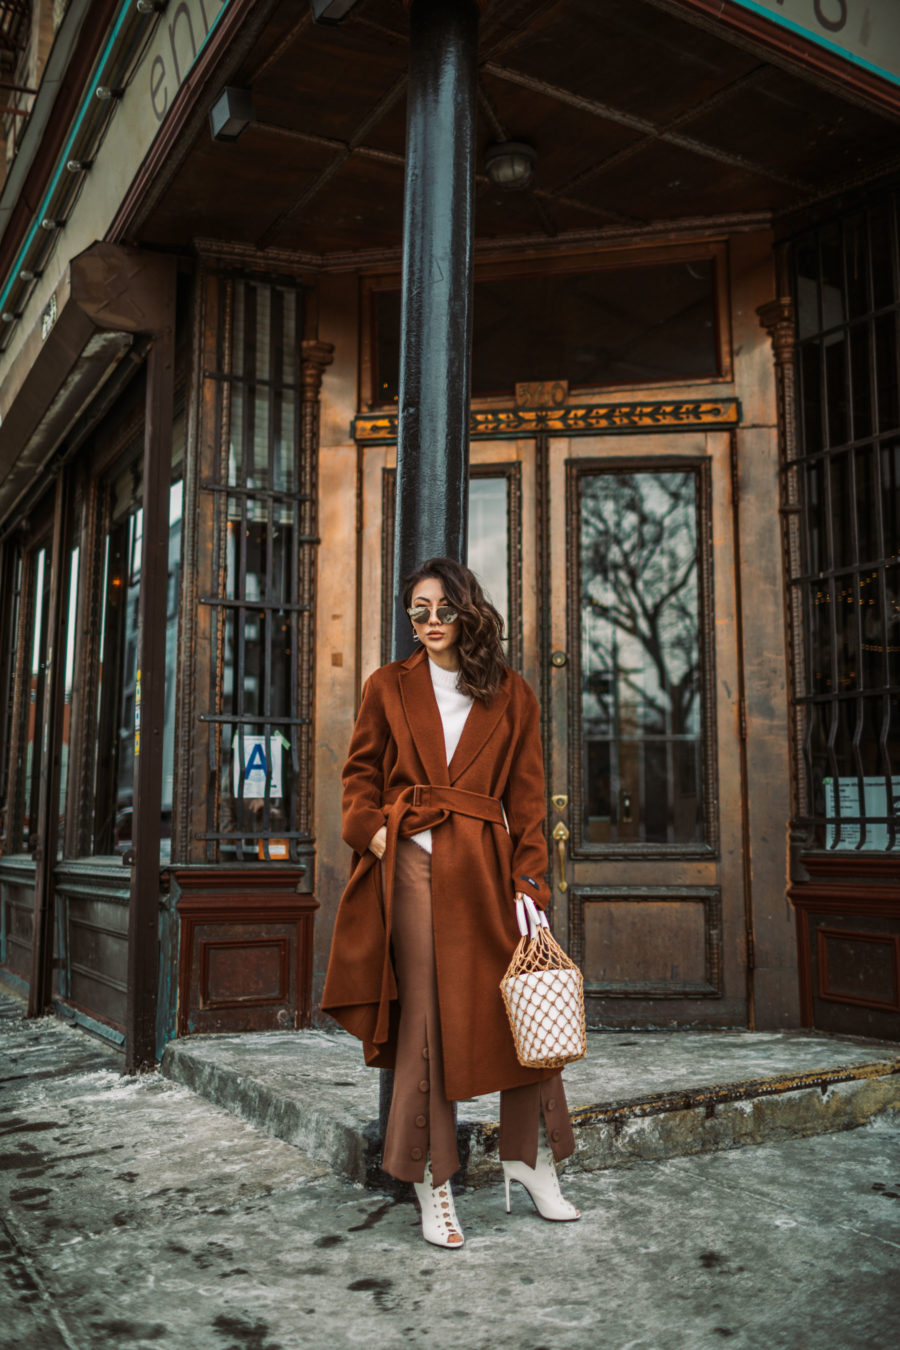 Winter wardrobe essentials - staud macrame bag, brown button trousers, wrap coat, robe coat, chic winter outfit, new york fashion blogger, aviator sunglasses, brown monochromatic outfit // Notjessfashion.com